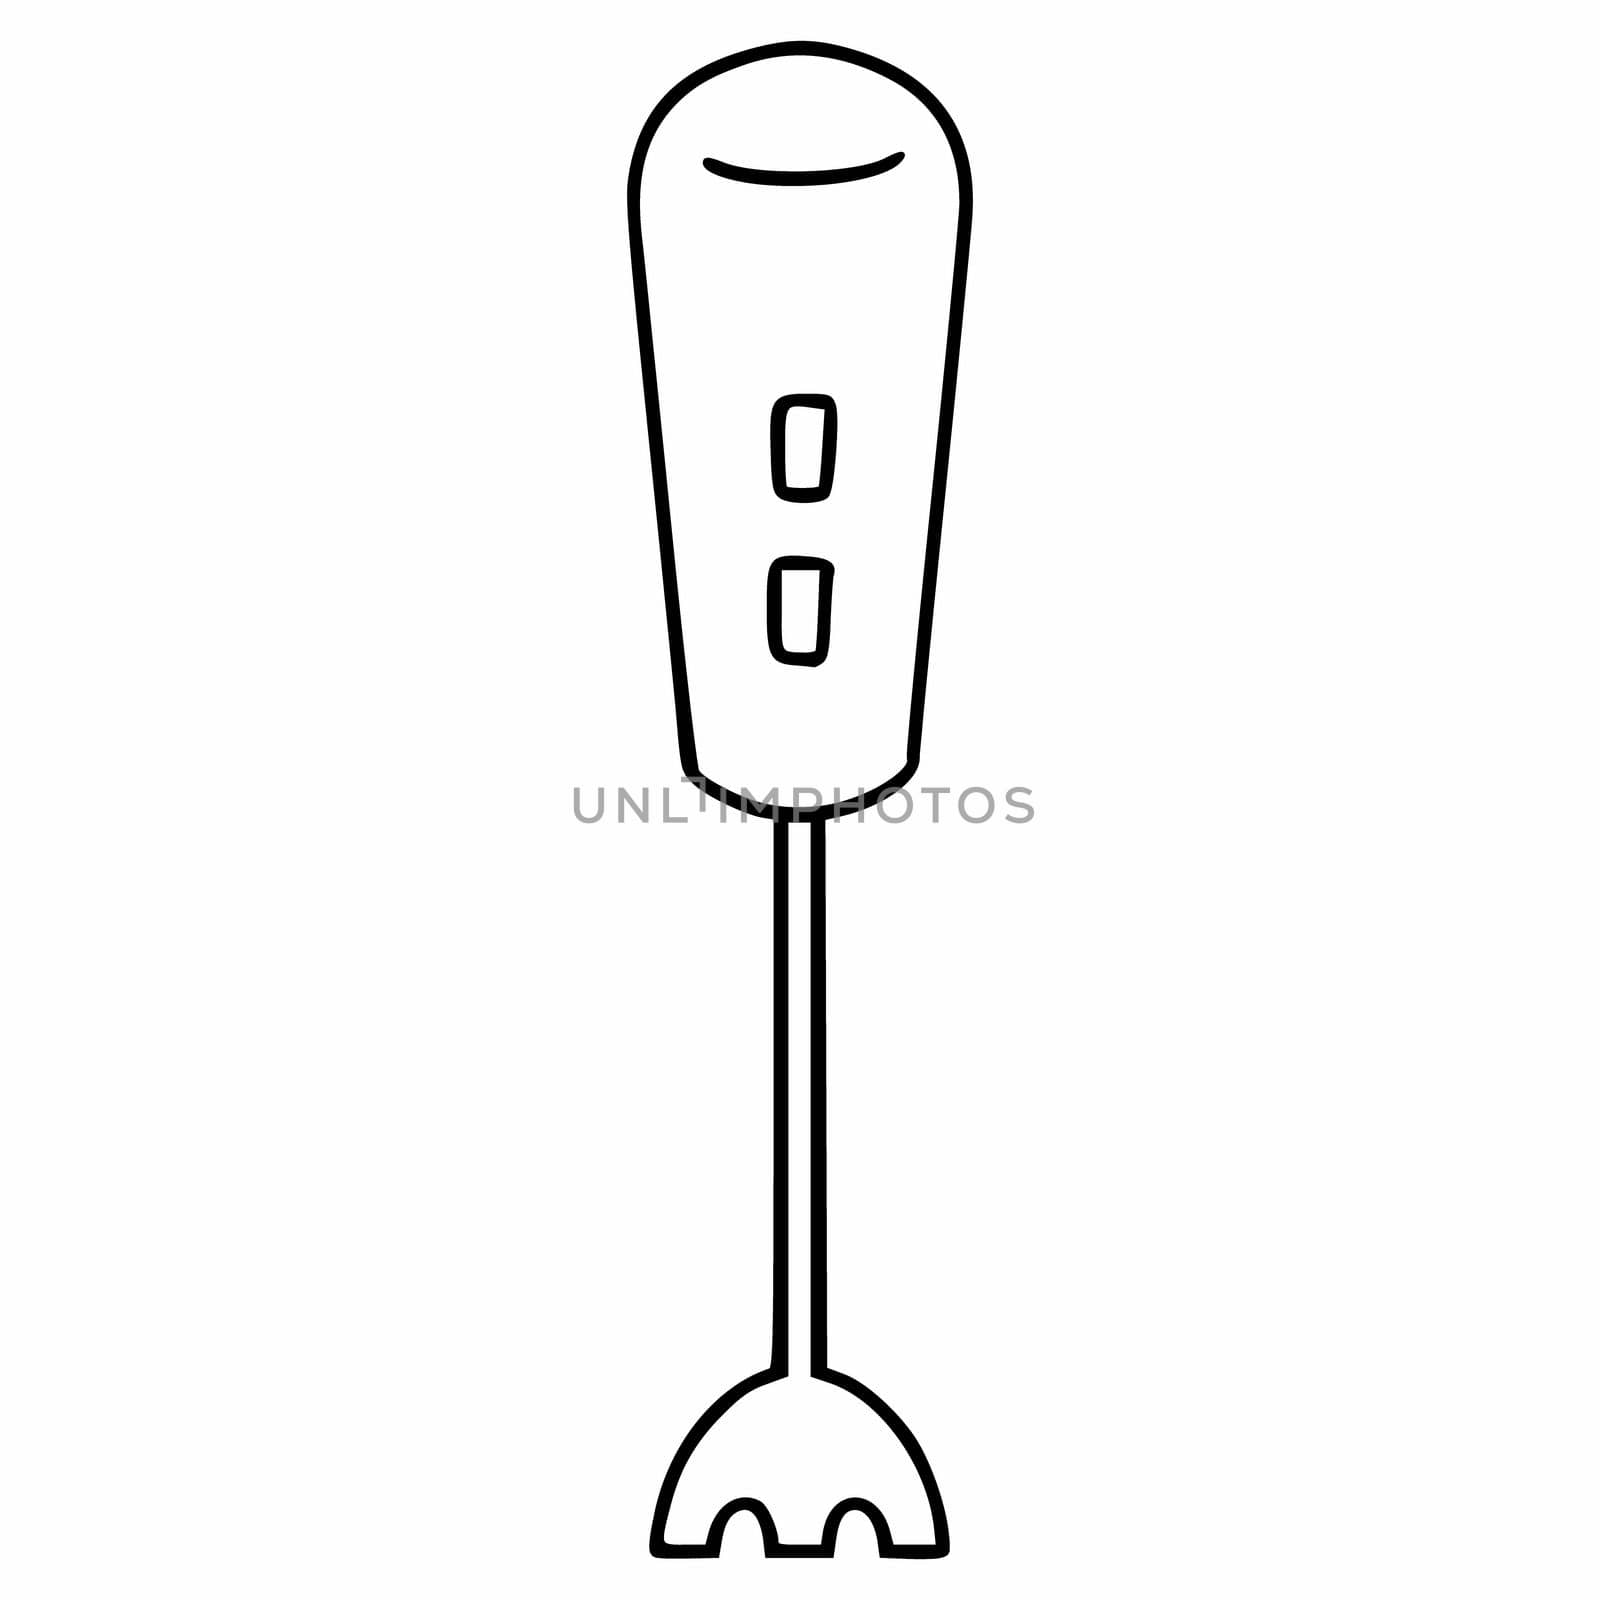 A linear-style immersion blender. Kitchen appliances for chopping food. Vector icon in the doodle style.